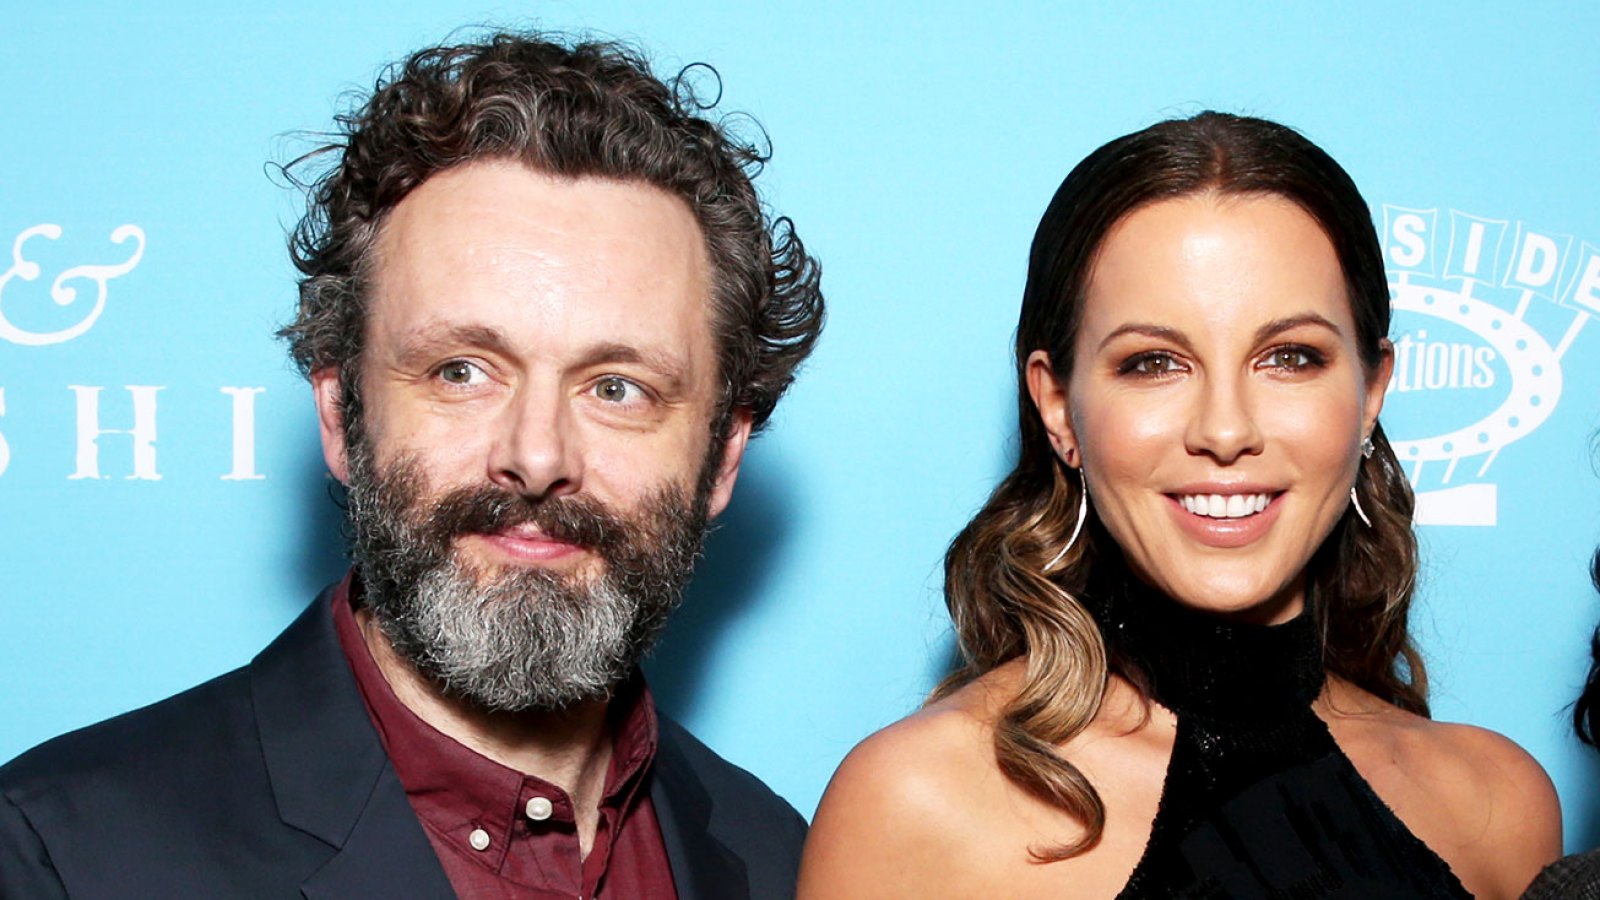 Kate Beckinsale Celebrates Holiday ‘Perineum’ With Ex Michael Sheen Dressed in a Bunny Onesie